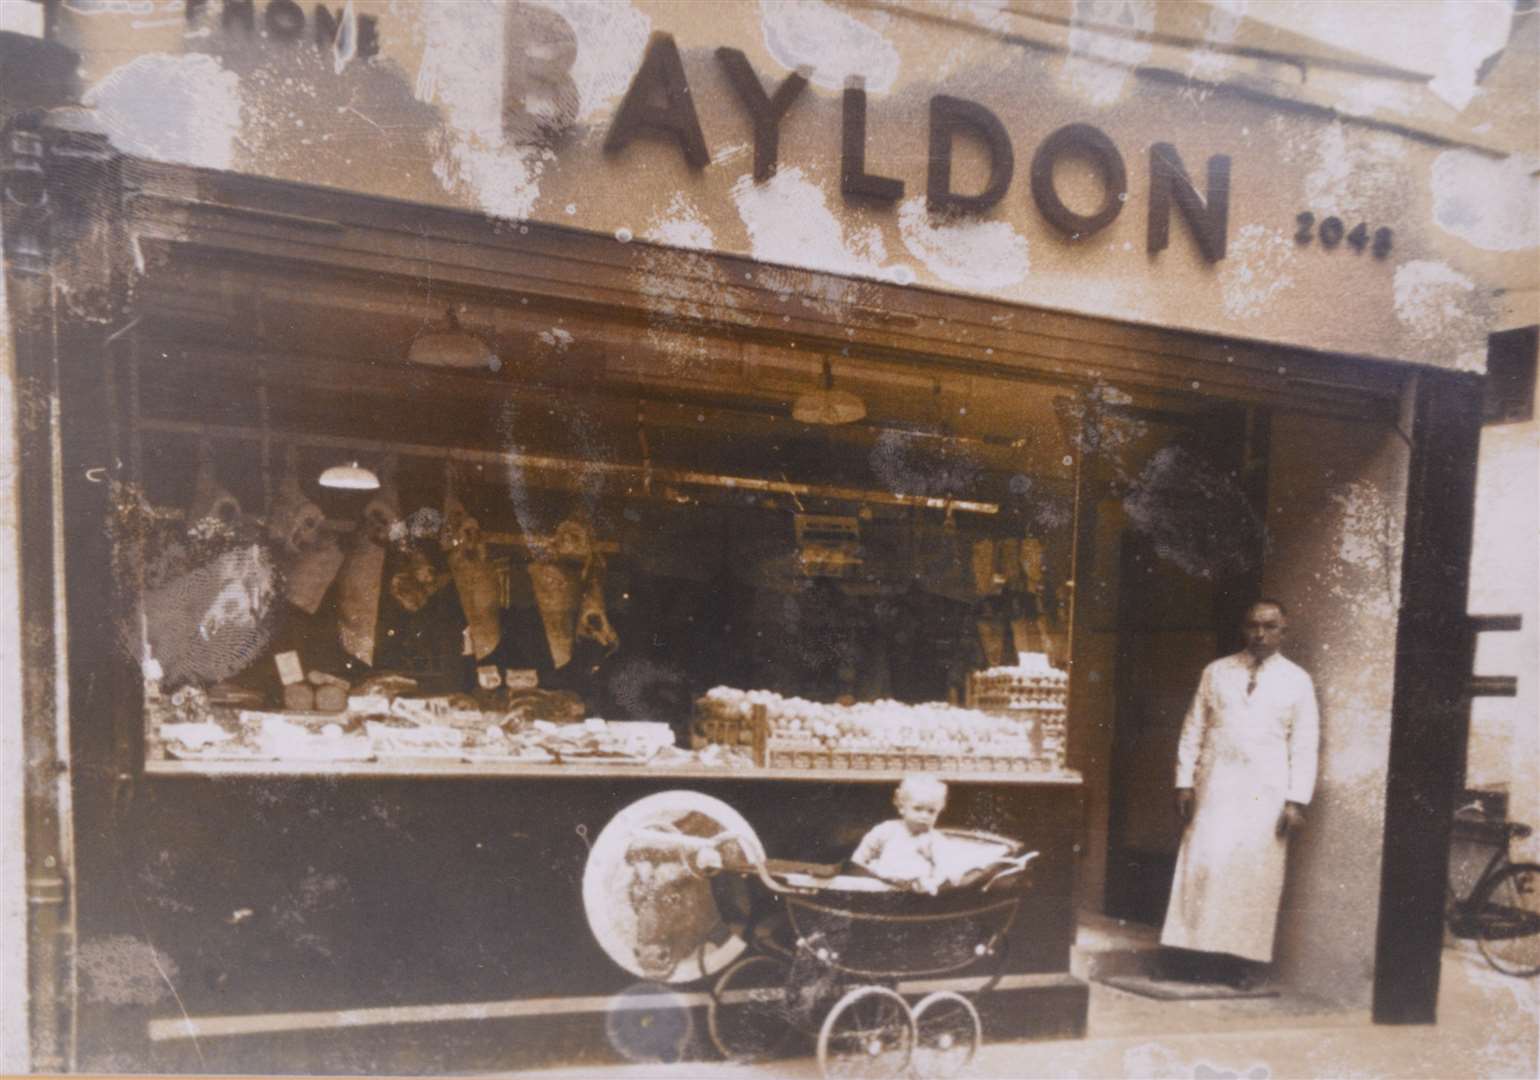 George Bayldon outside the shop in 1950